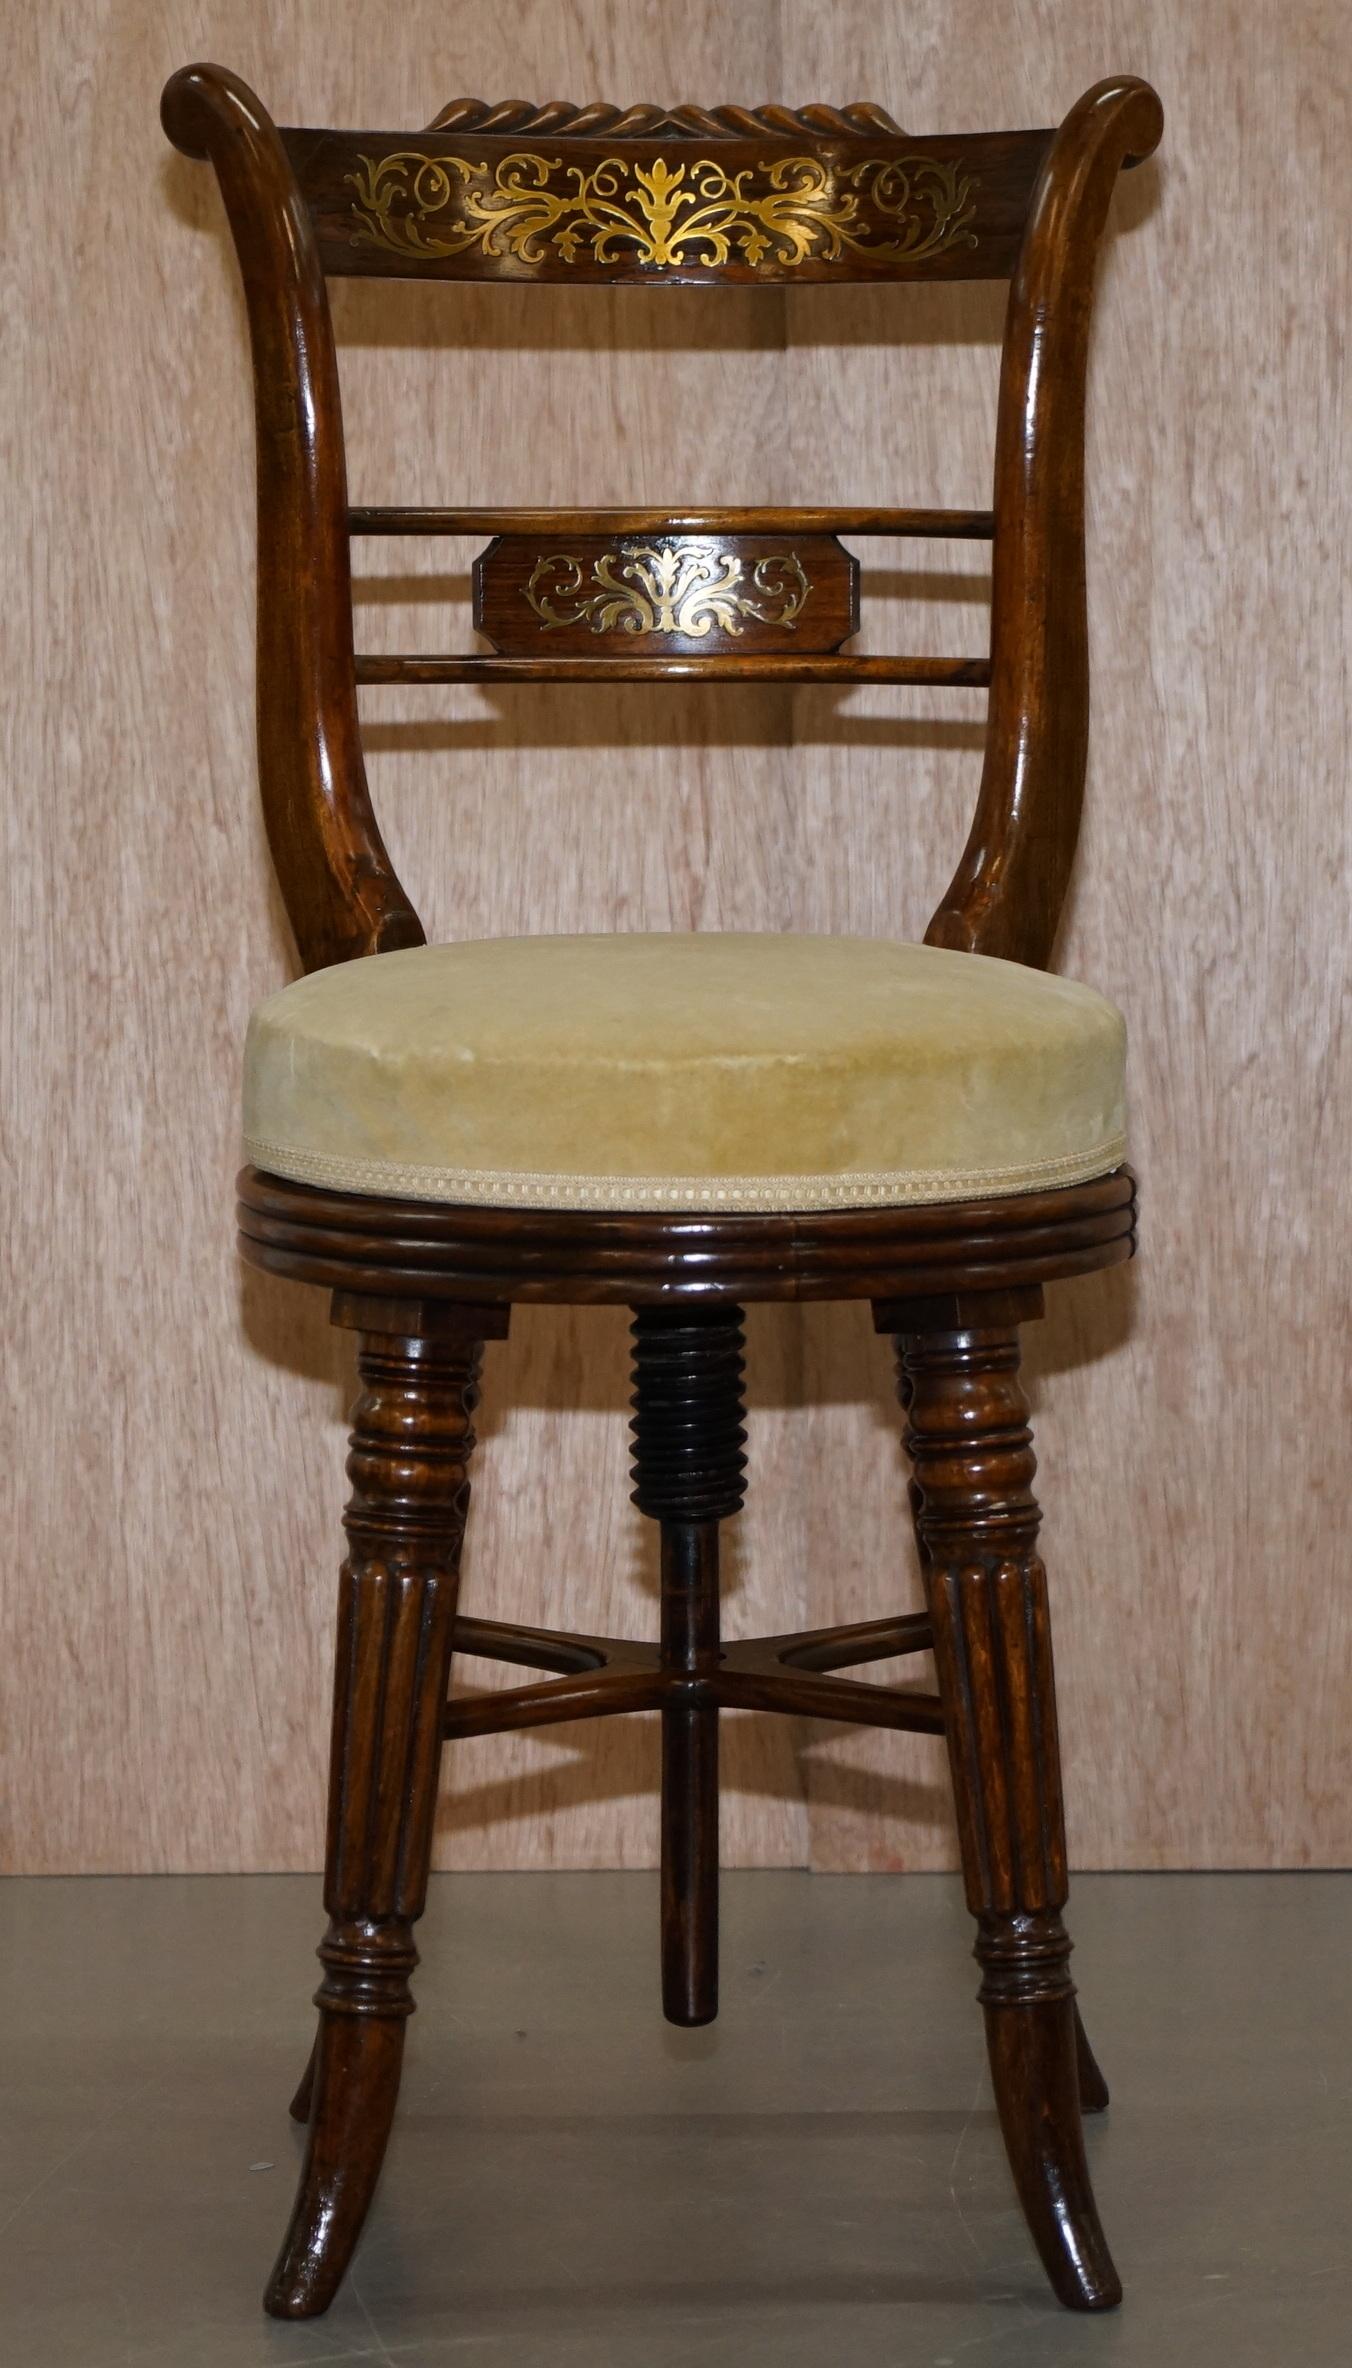 We are delighted to this stunning and very rare original Gillows of Lancaster Rosewood height-adjustable Harpist musician stool

A very good looking and well-made piece, the chair is height adjustable as you can see, it’s a mixed beach and